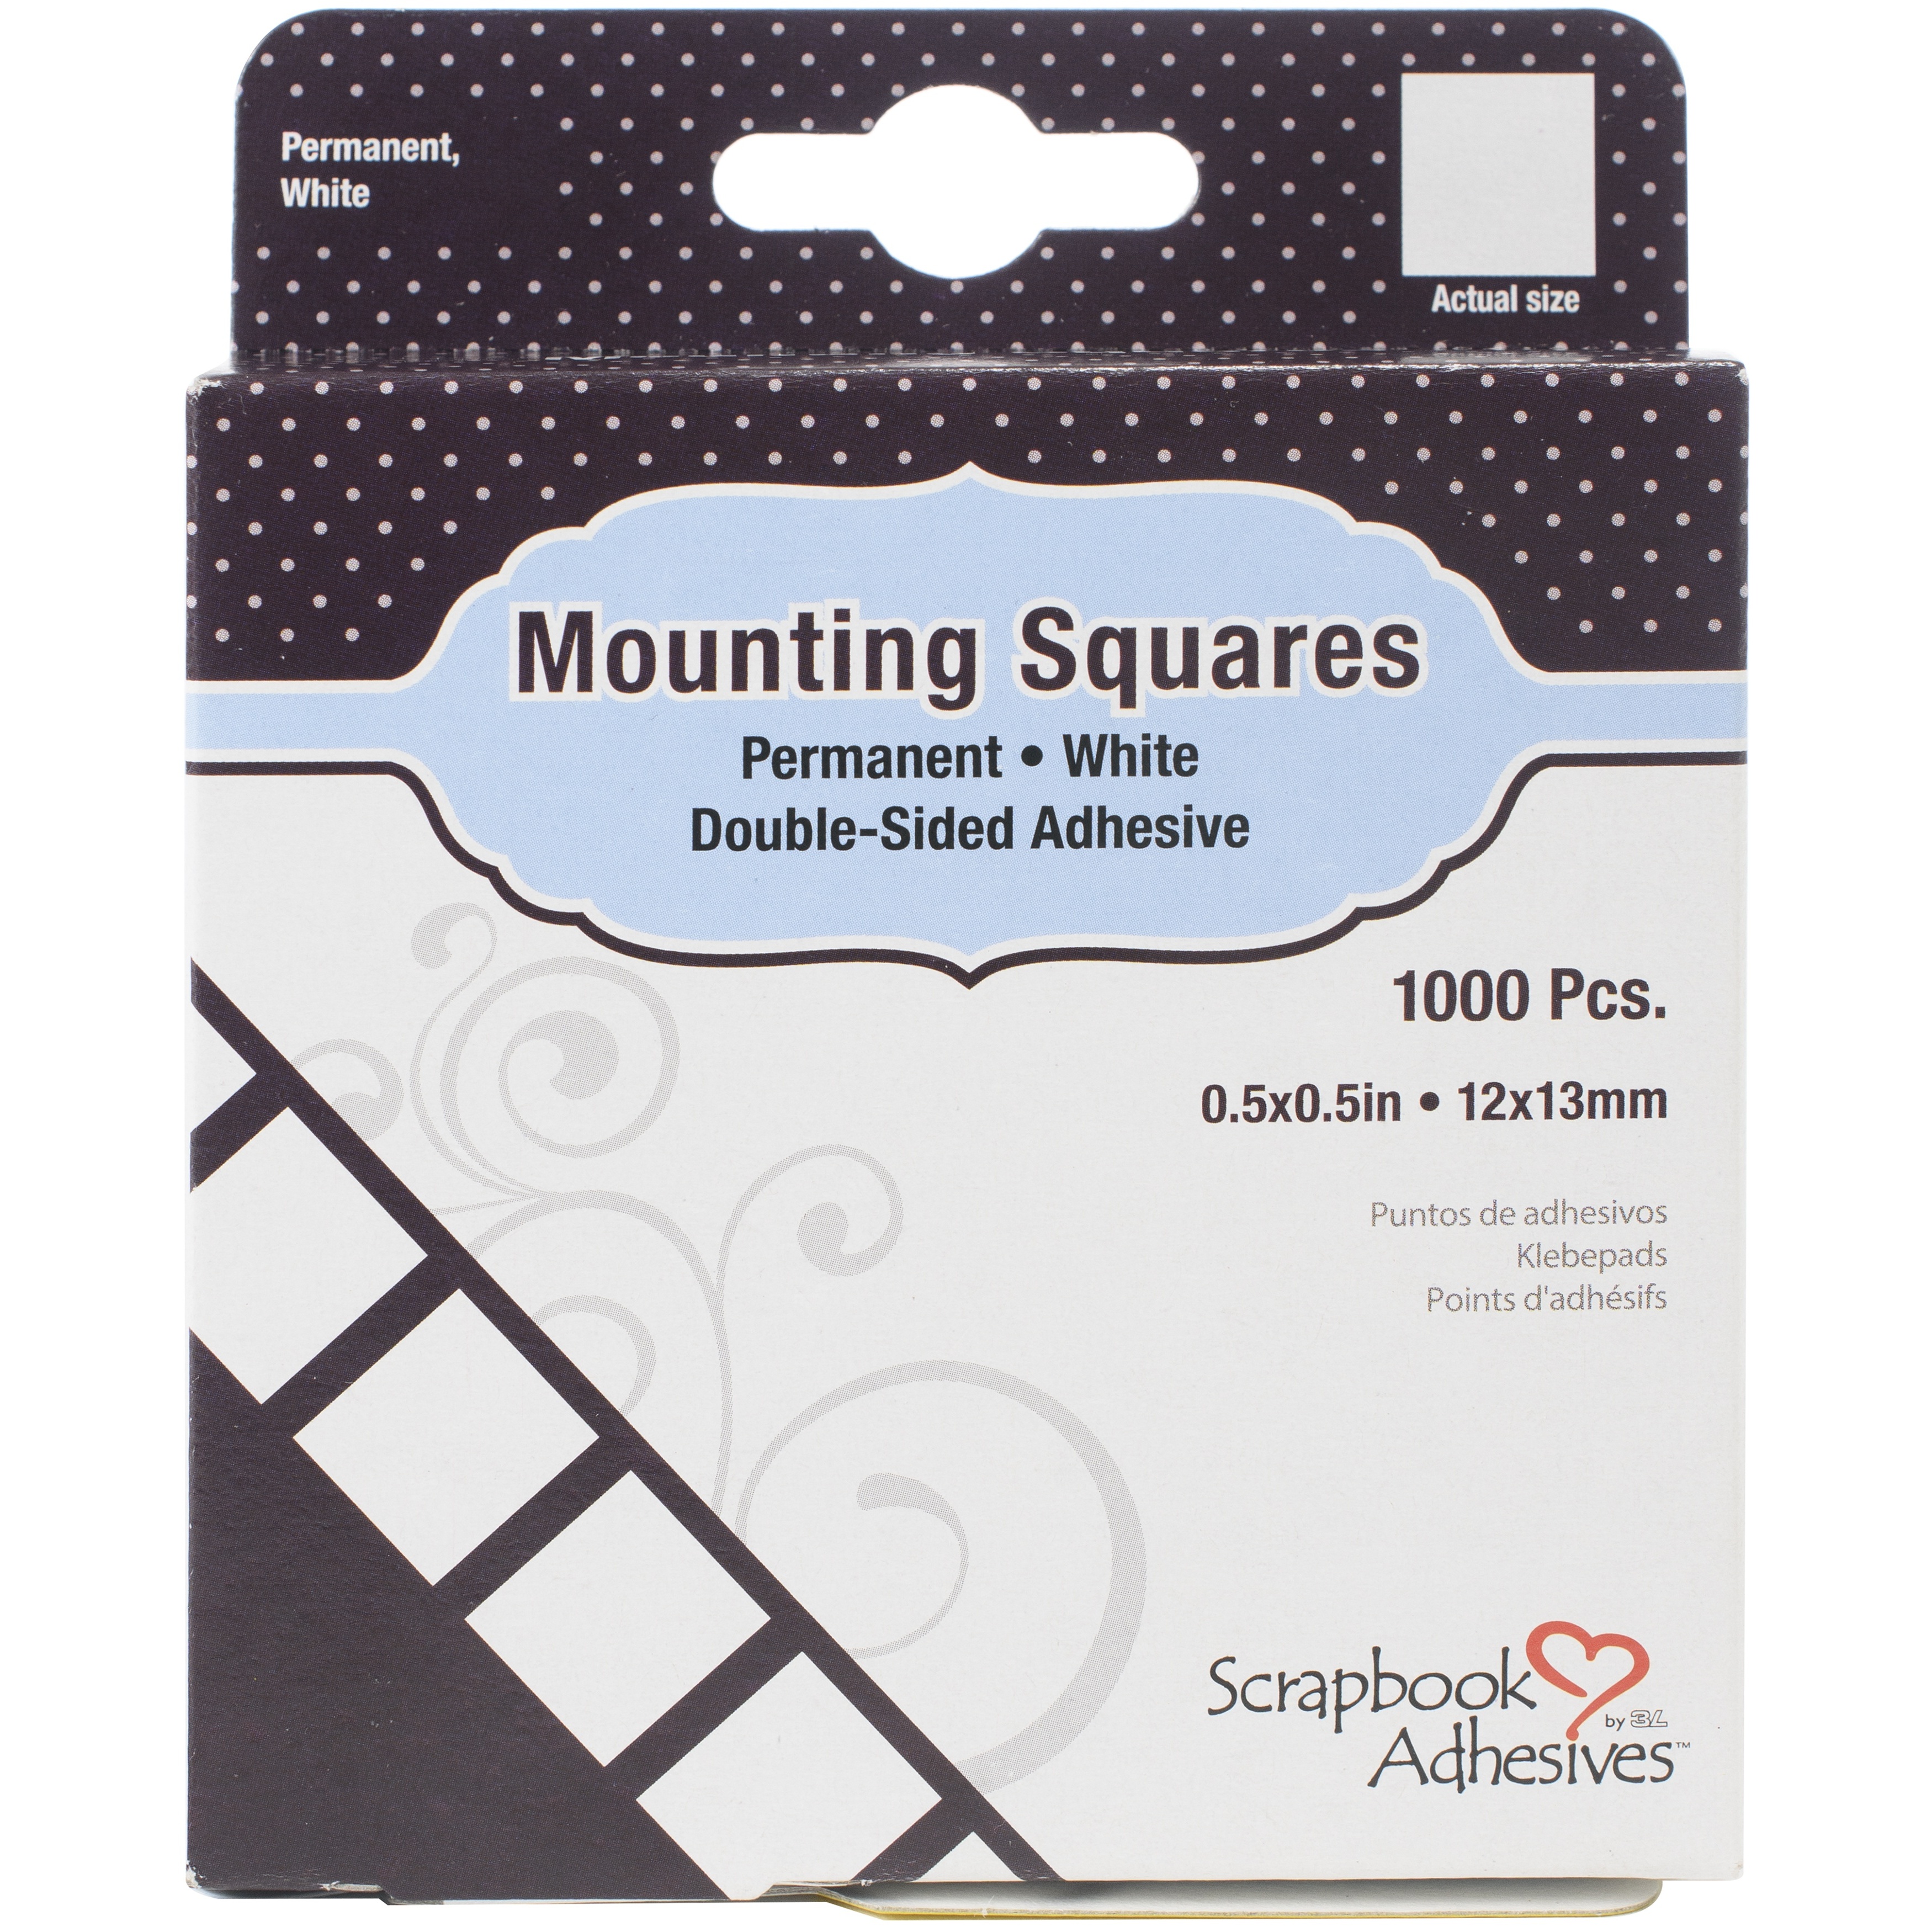 Scrapbook Adhesives By 3L® White Permanent Mounting Squares, 1000ct.